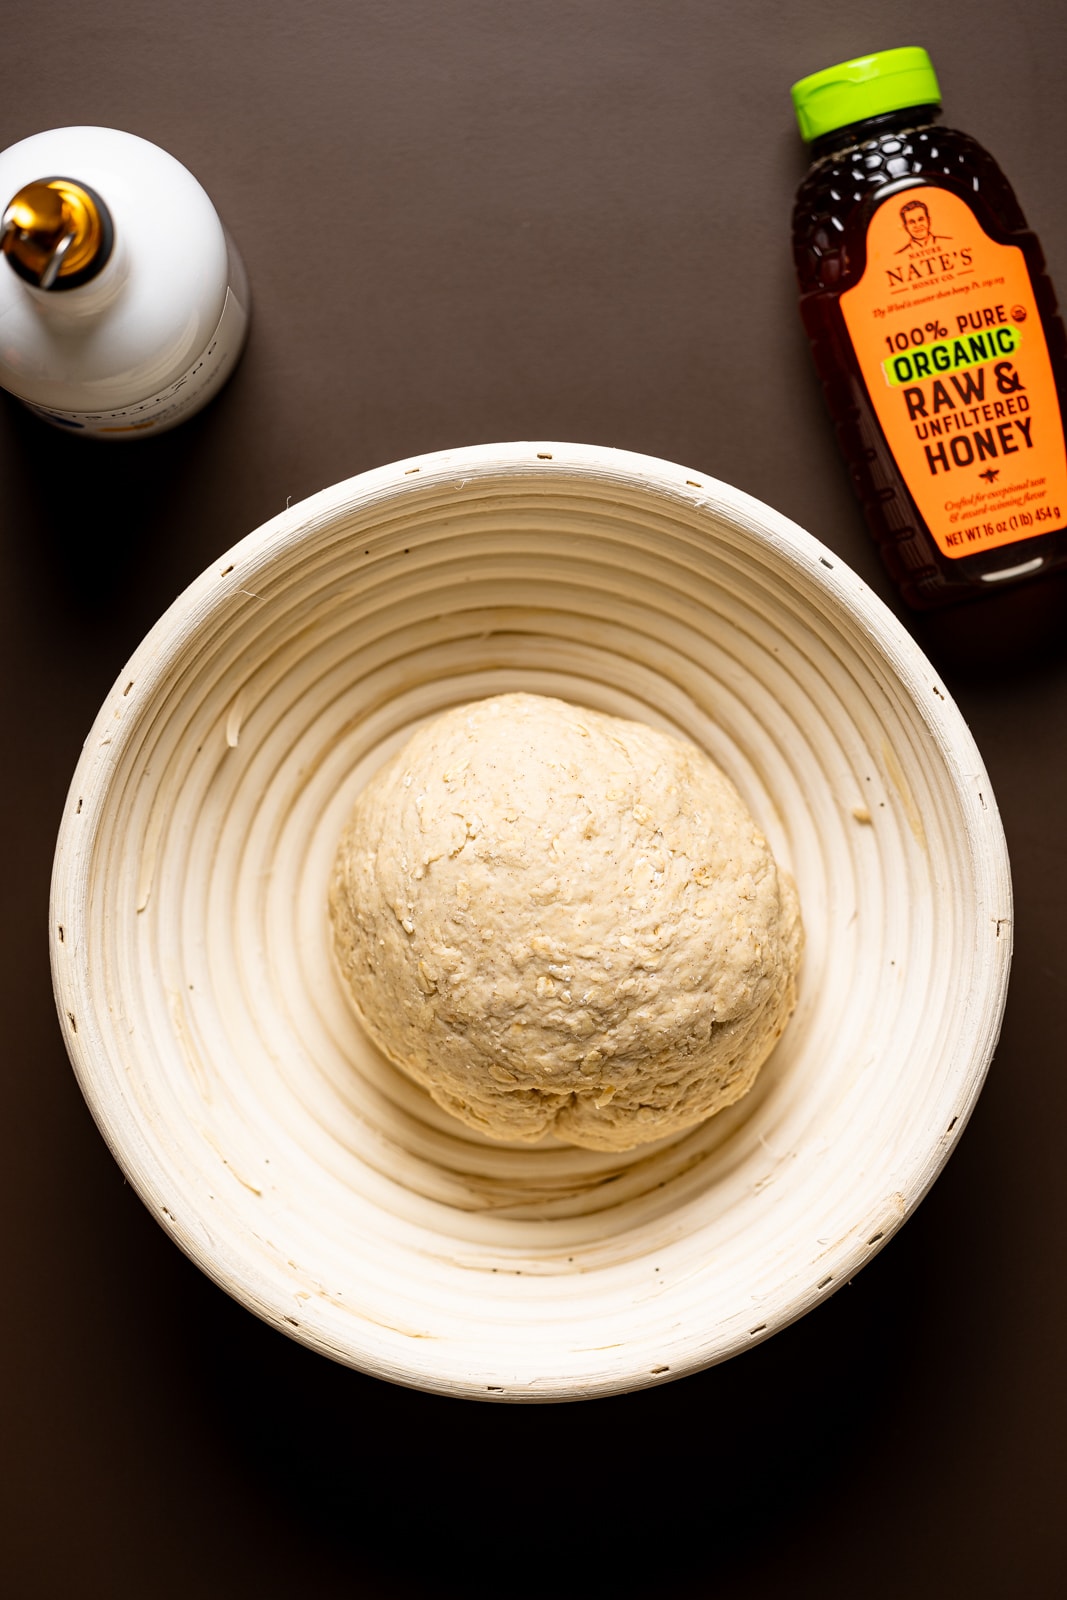 Bread dough in a bread proofing bowl with honey and olive oil on a brown table.